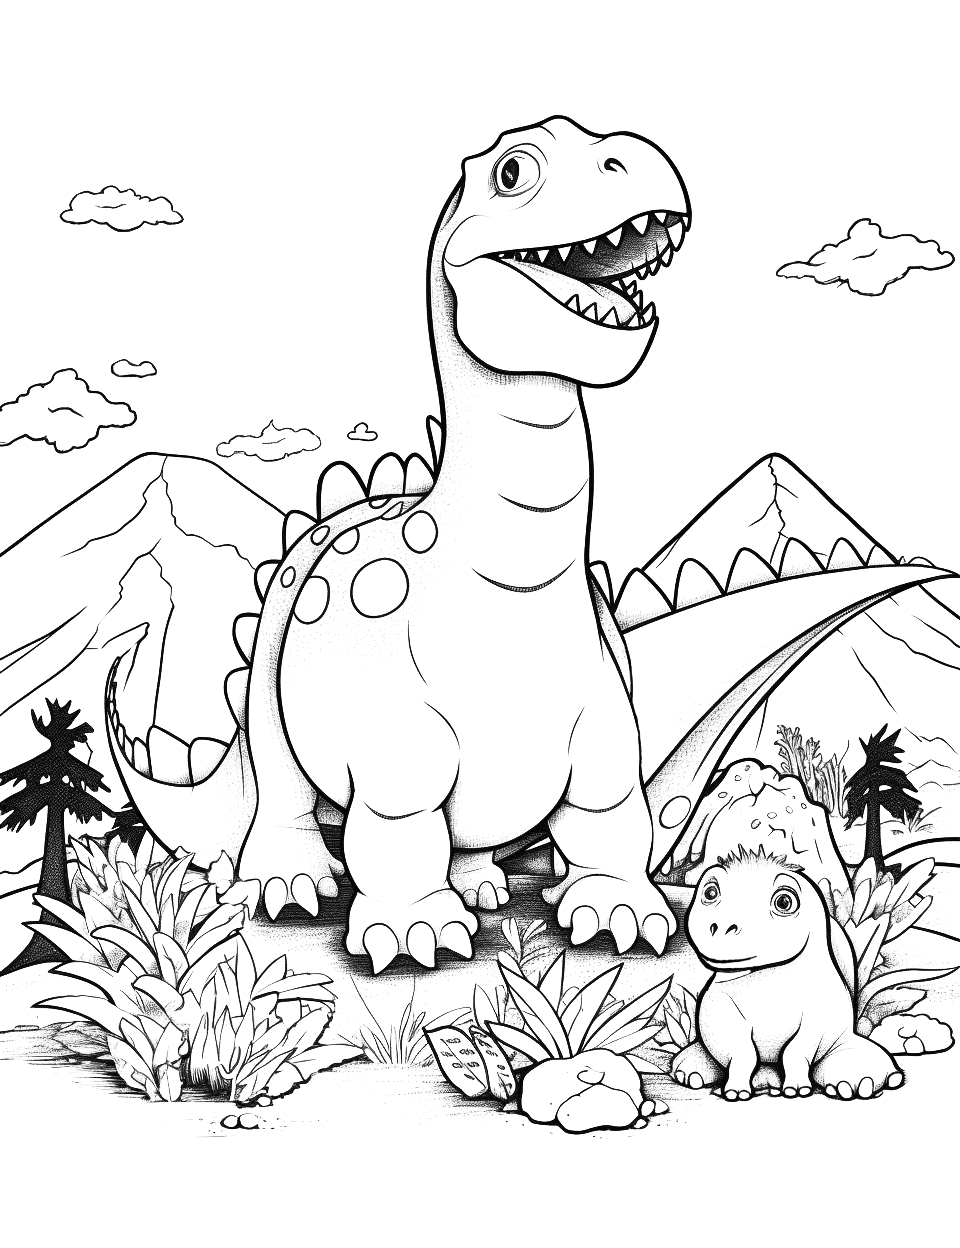 Camp Cretaceous Fun Dinosaur Coloring Page - A scene from Camp Cretaceous featuring the campers and their dinosaur friends.